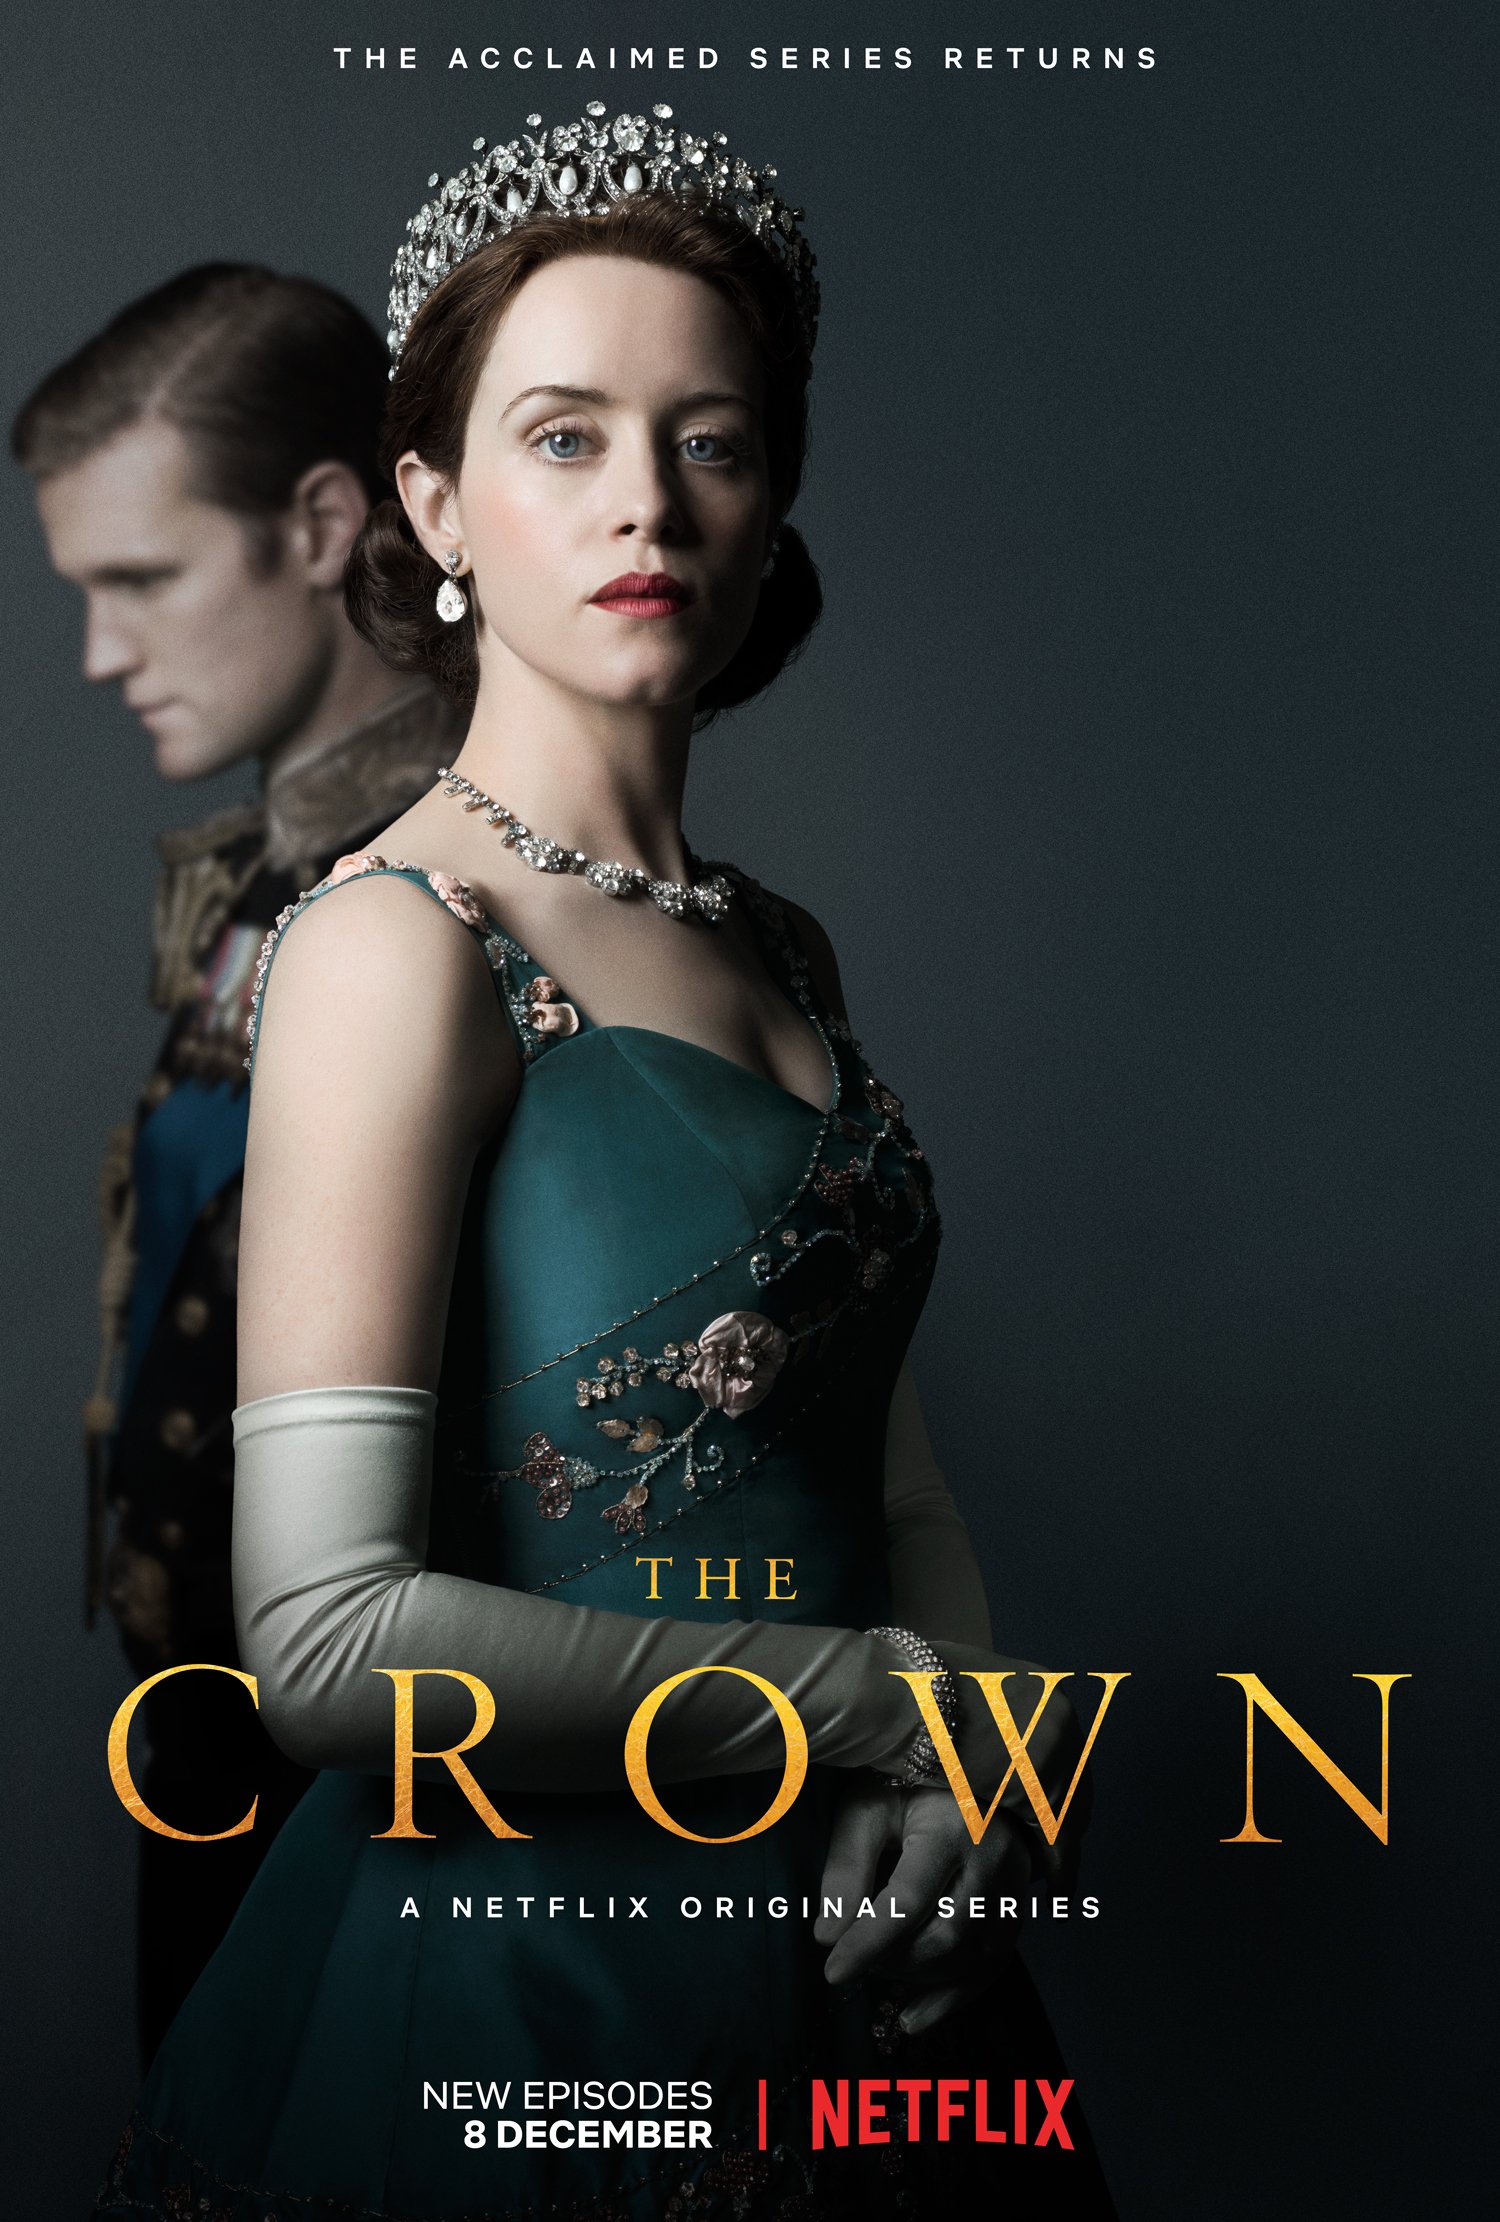 Promotional photos for season 2 of 'The Crown'